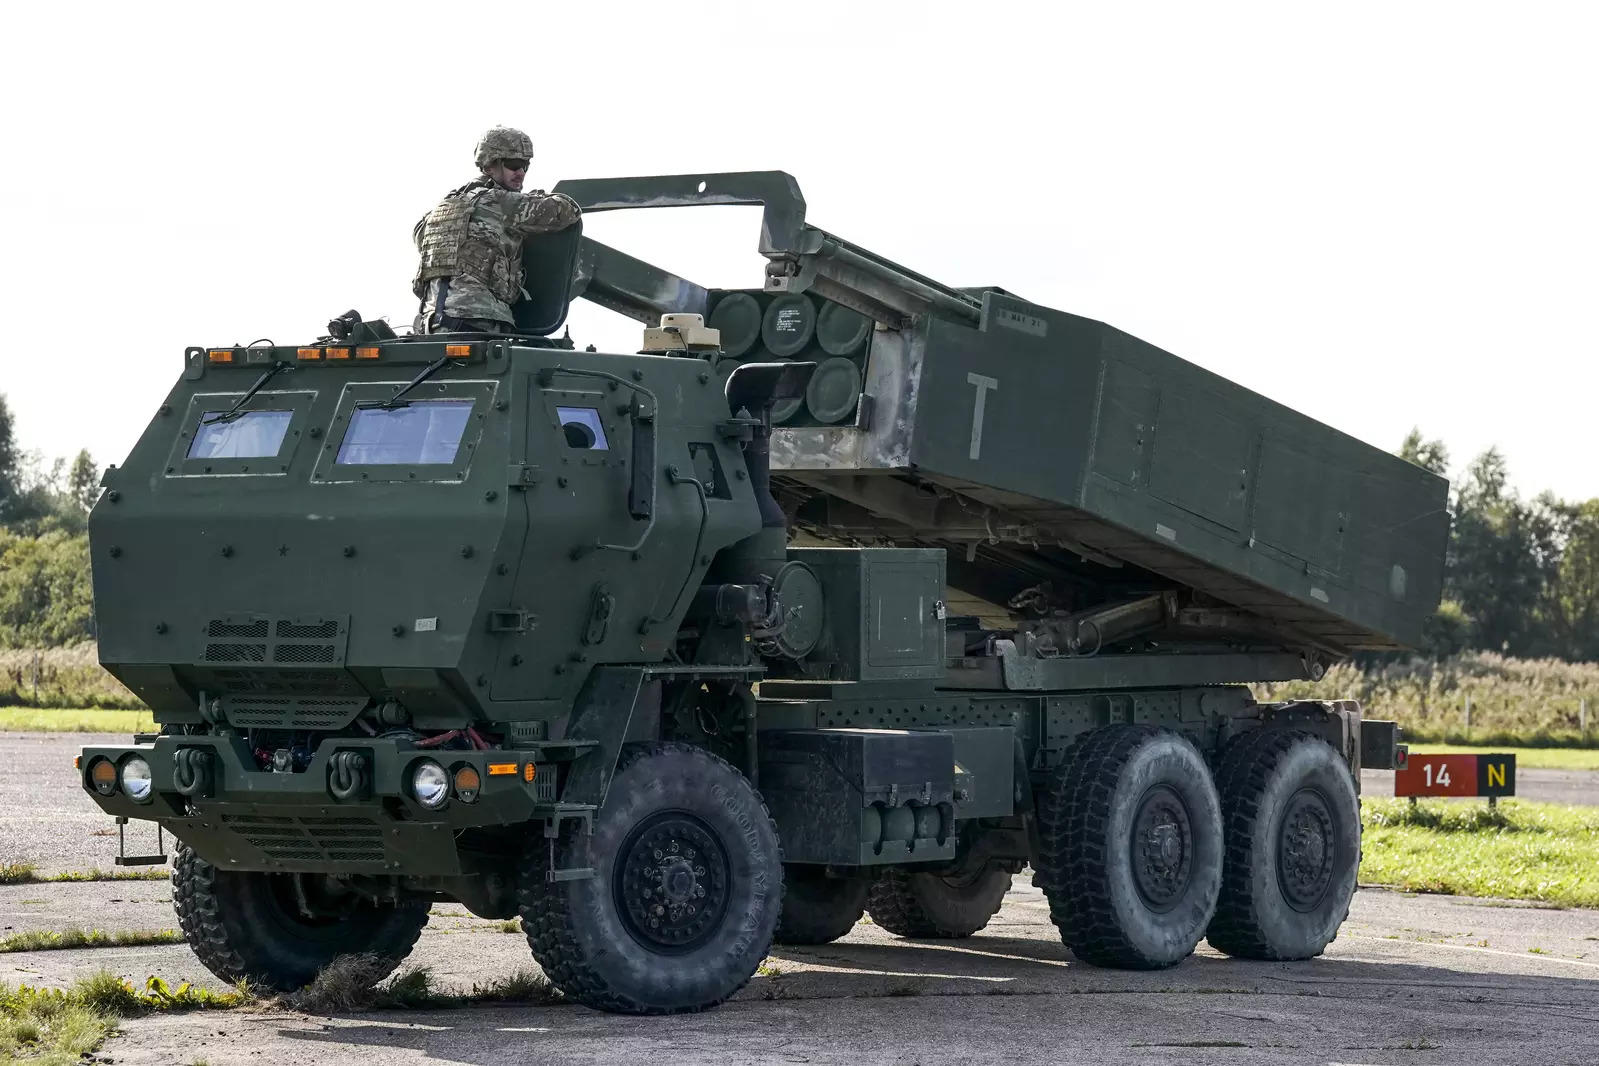 The White House said it was shipping more Himars precision rocket launchers to Ukraine.